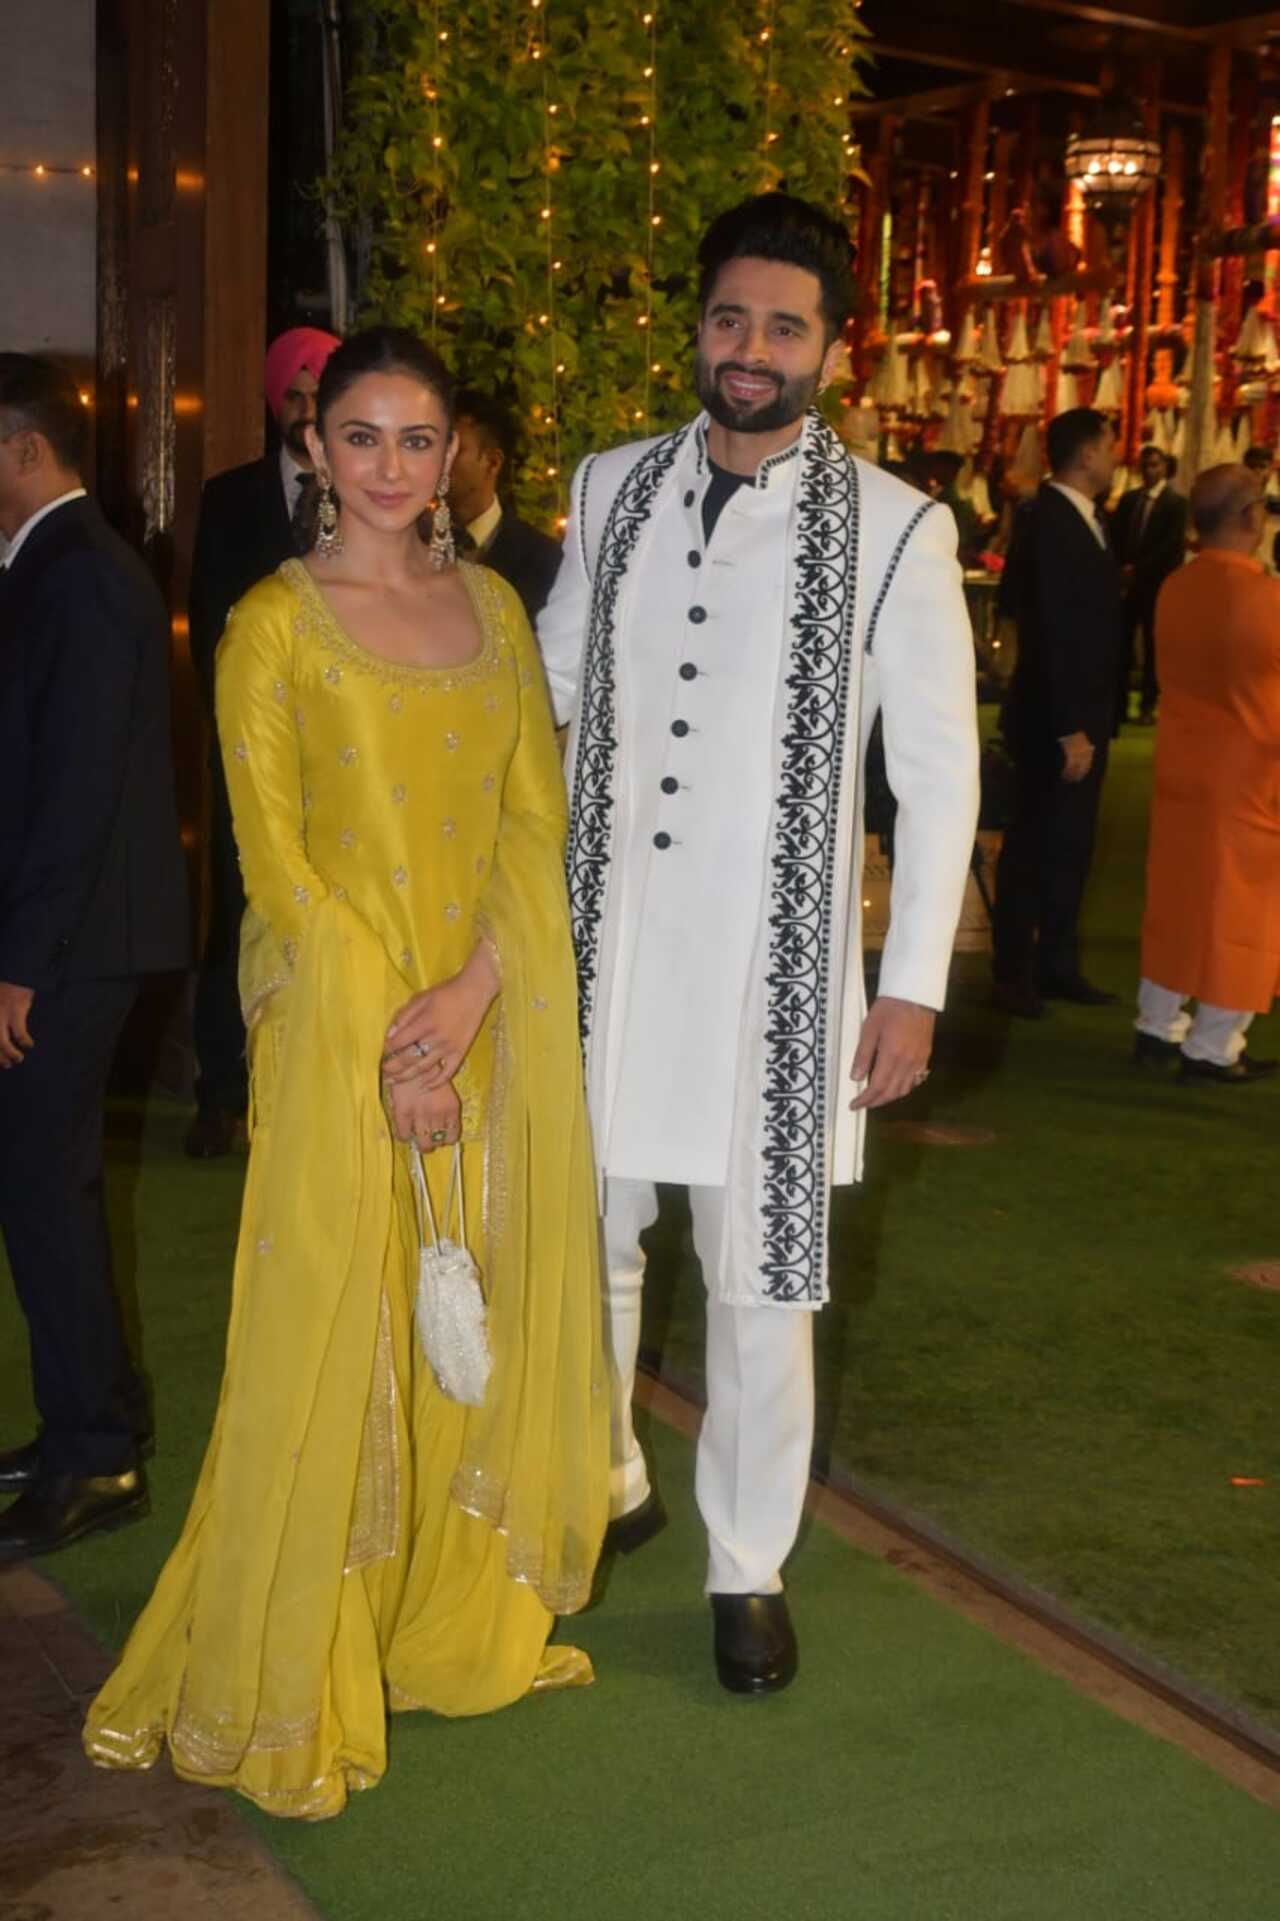 Rakul Preet Singh and Jackky Bhagnani posed for pictures together